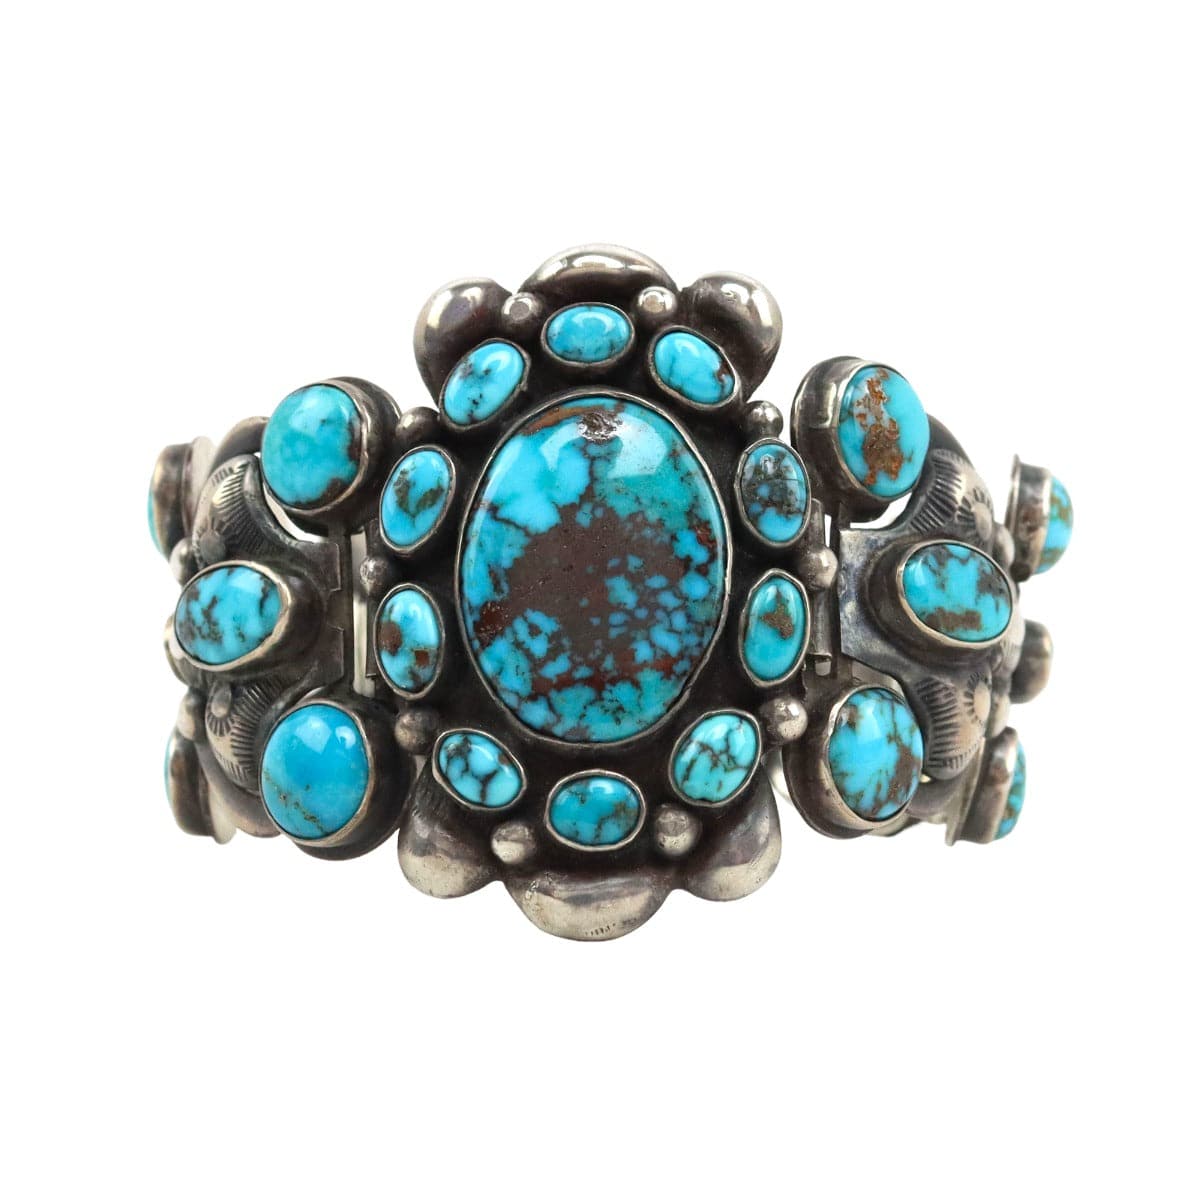 Frank Patania Sr. (1898-1964) - Cerrillos or Blue Gem Turquoise and Si